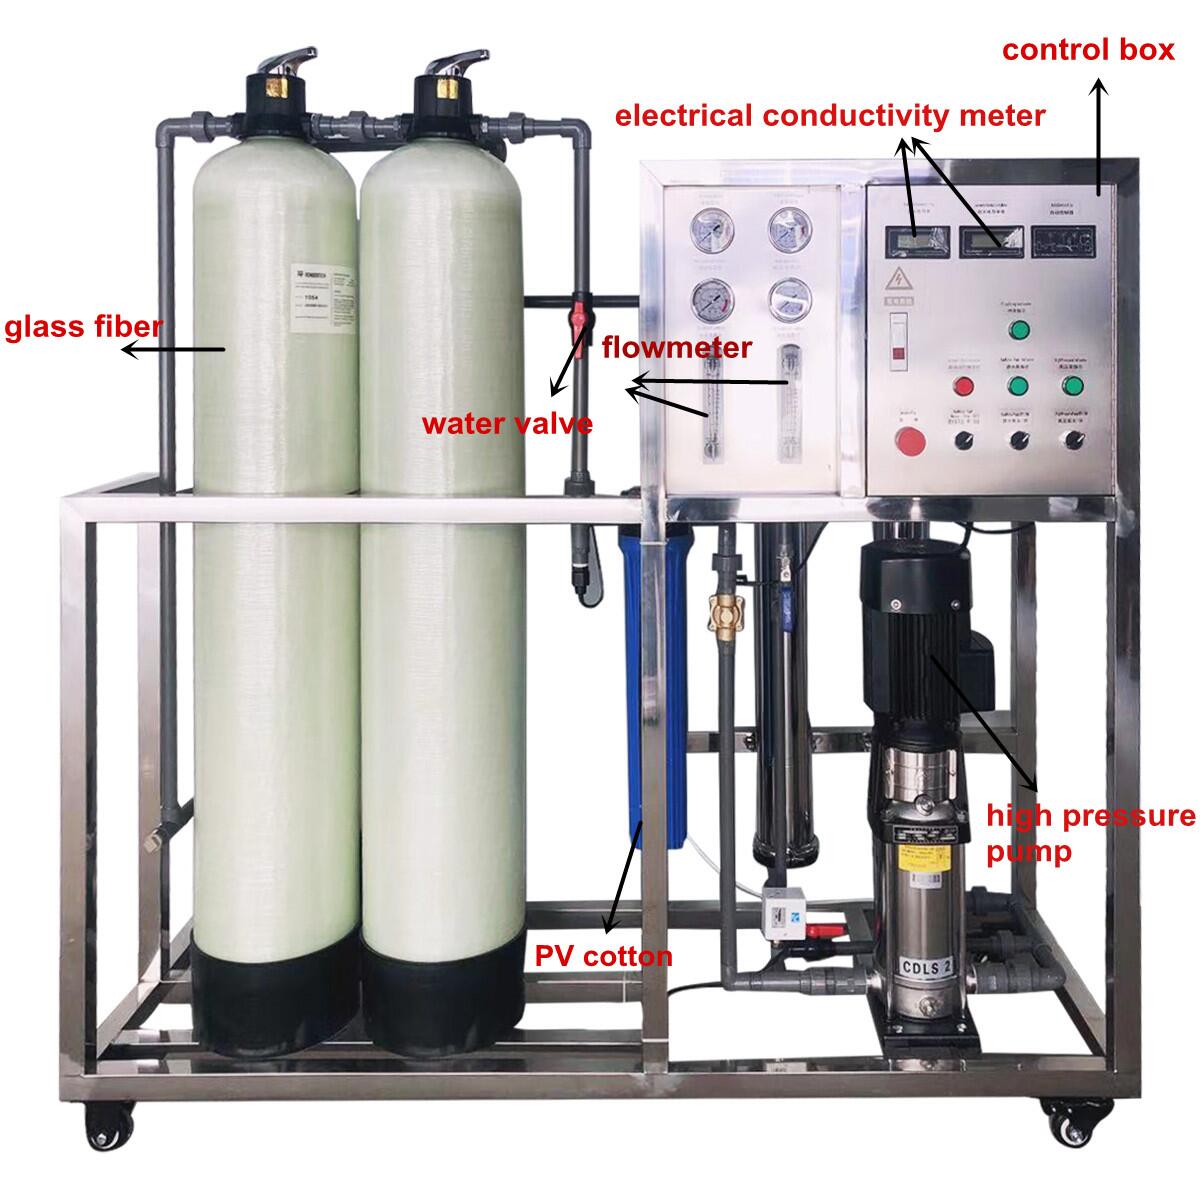 Awesome！Don't understand the functions of various instruments of water treatment equipment? Read this!